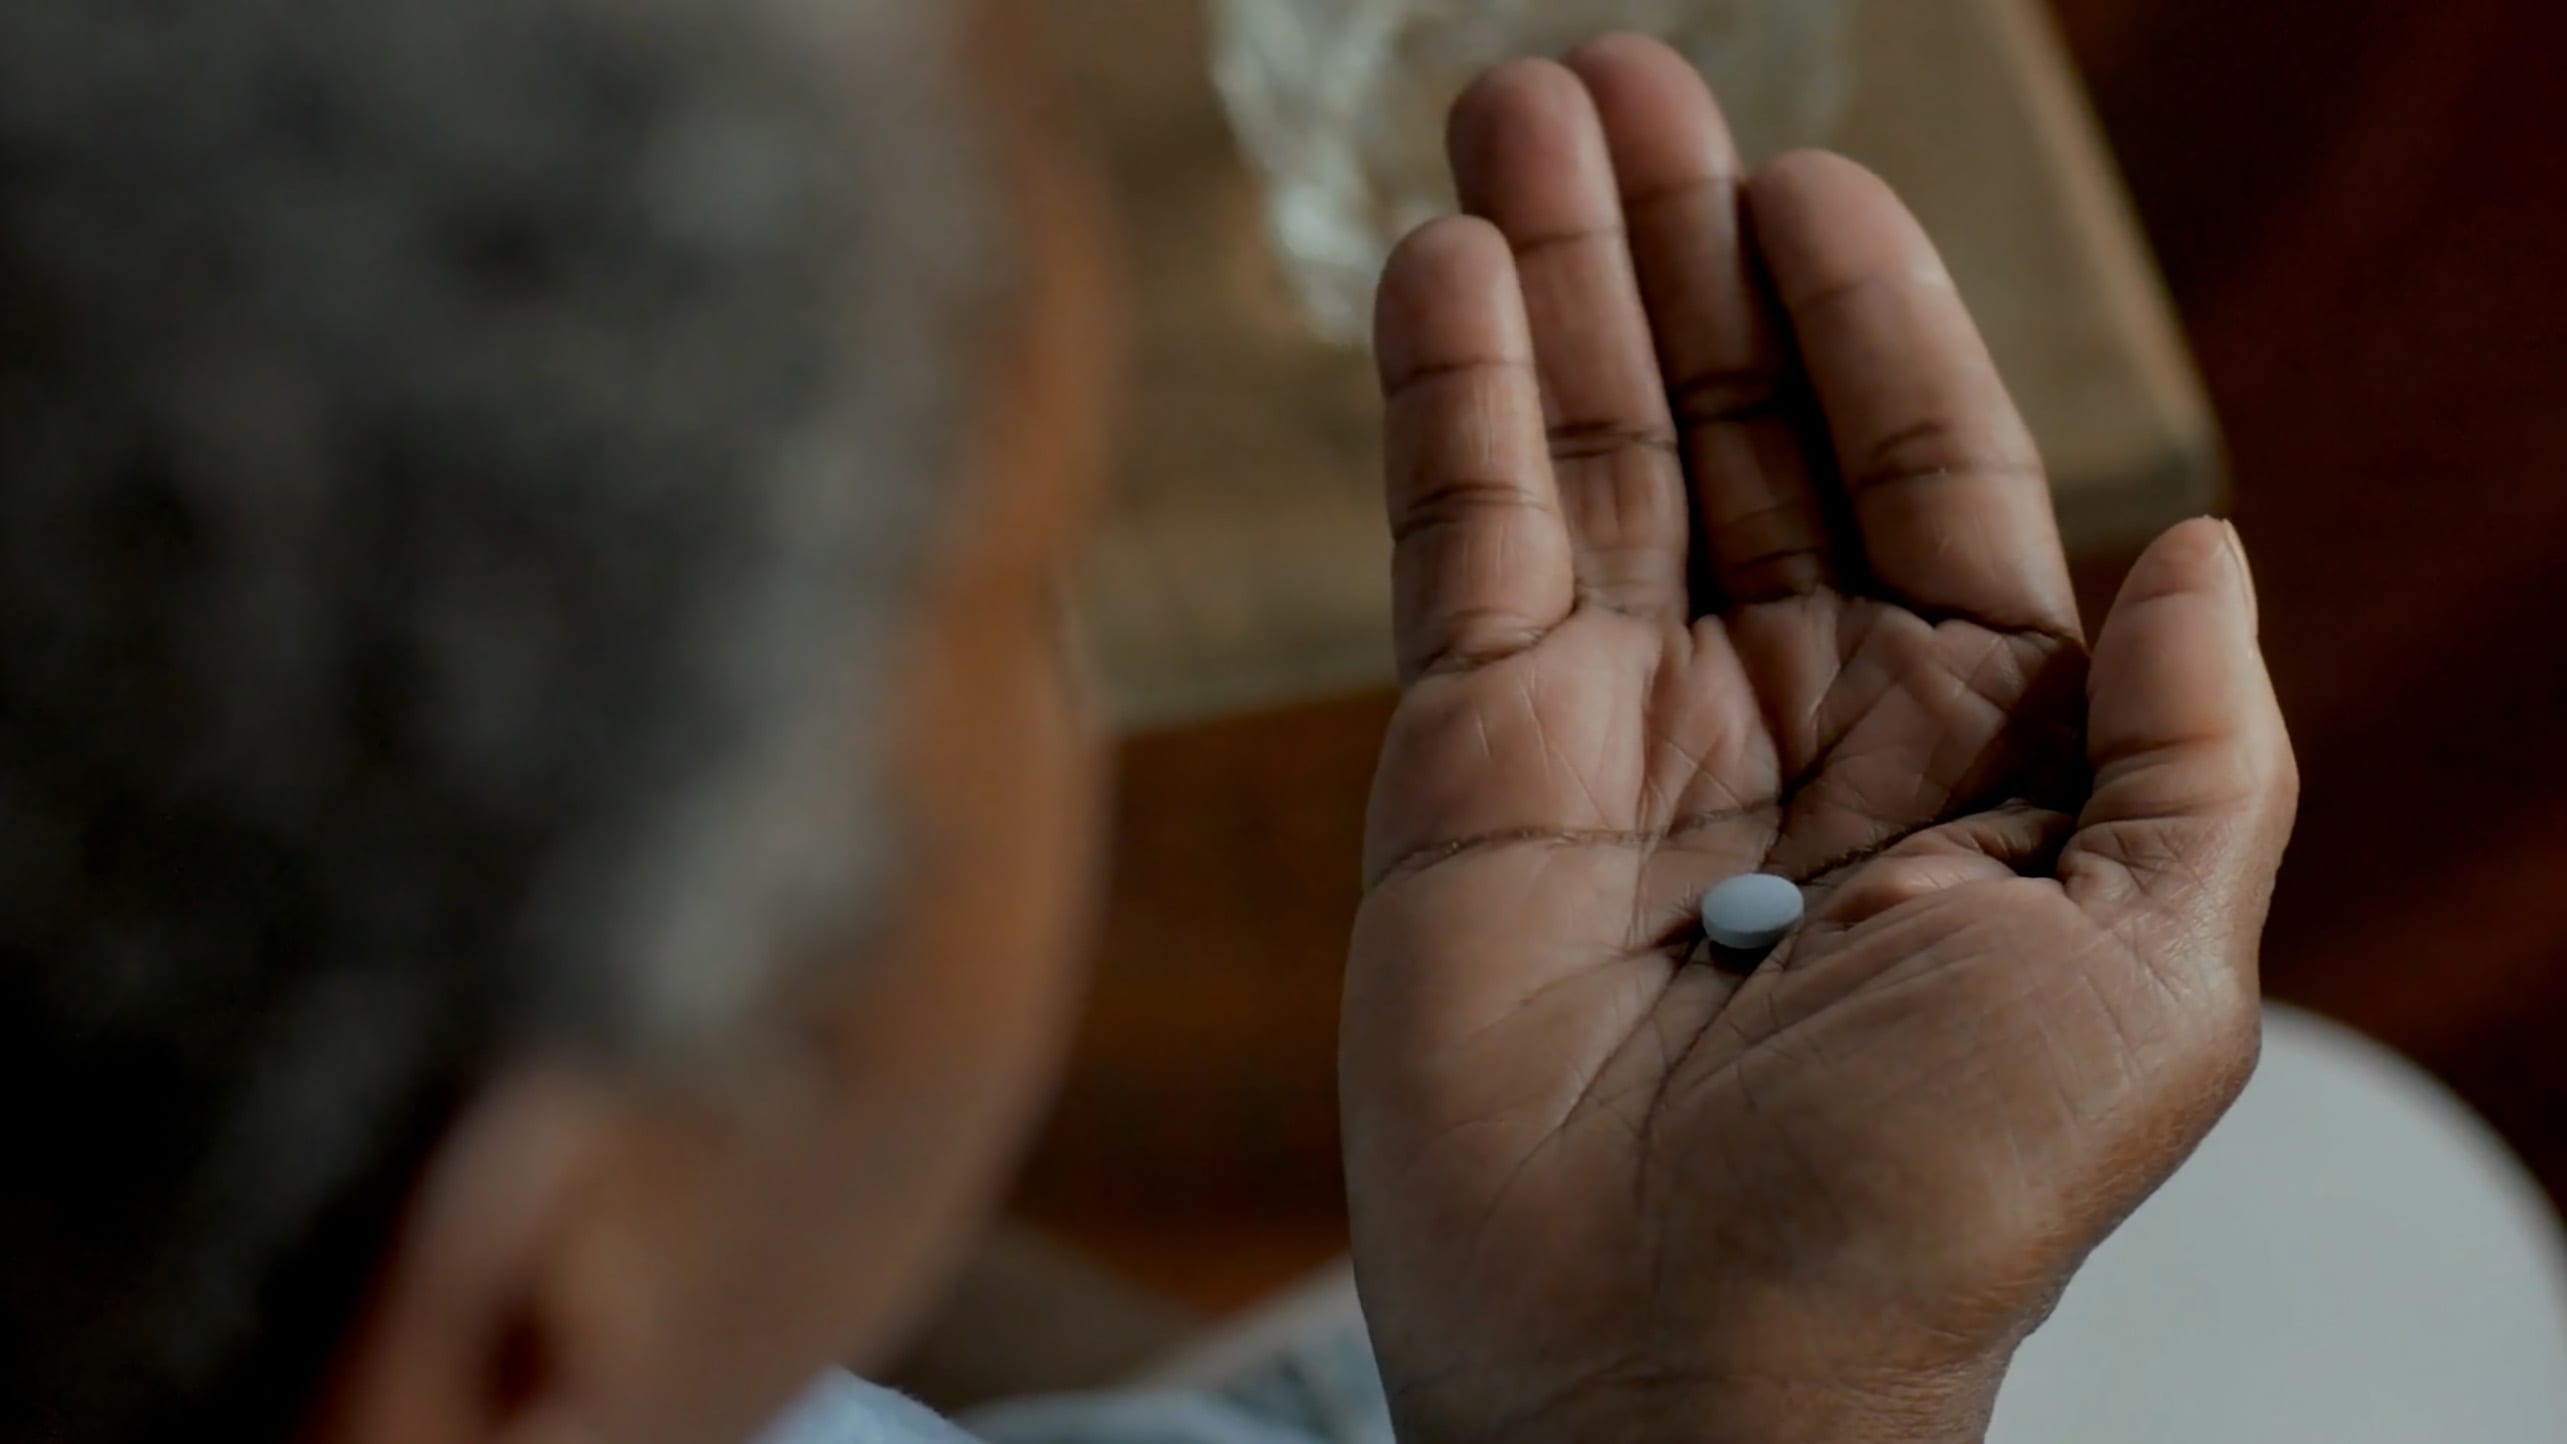 African American woman with greying hair looking down at a light blue pill in the palm of her hand